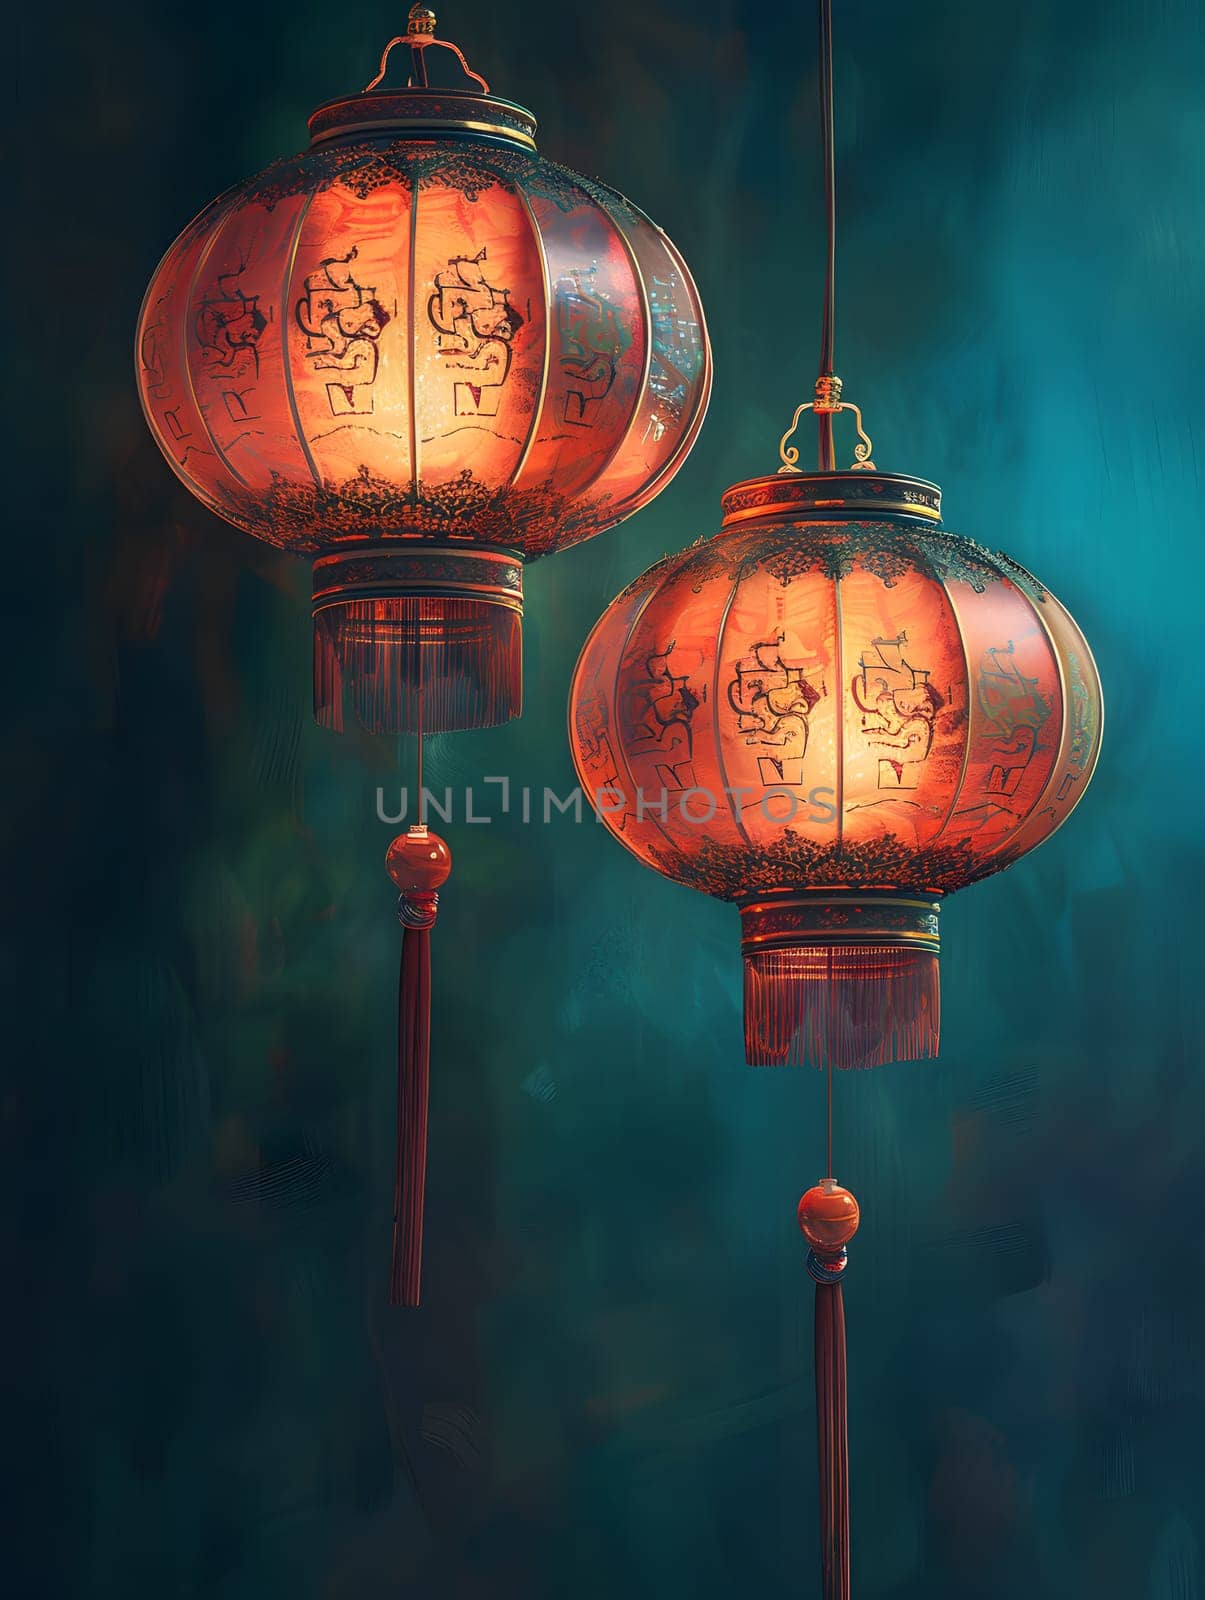 Two lanterns hang from the ceiling, casting an orange glow in the dark room by Nadtochiy